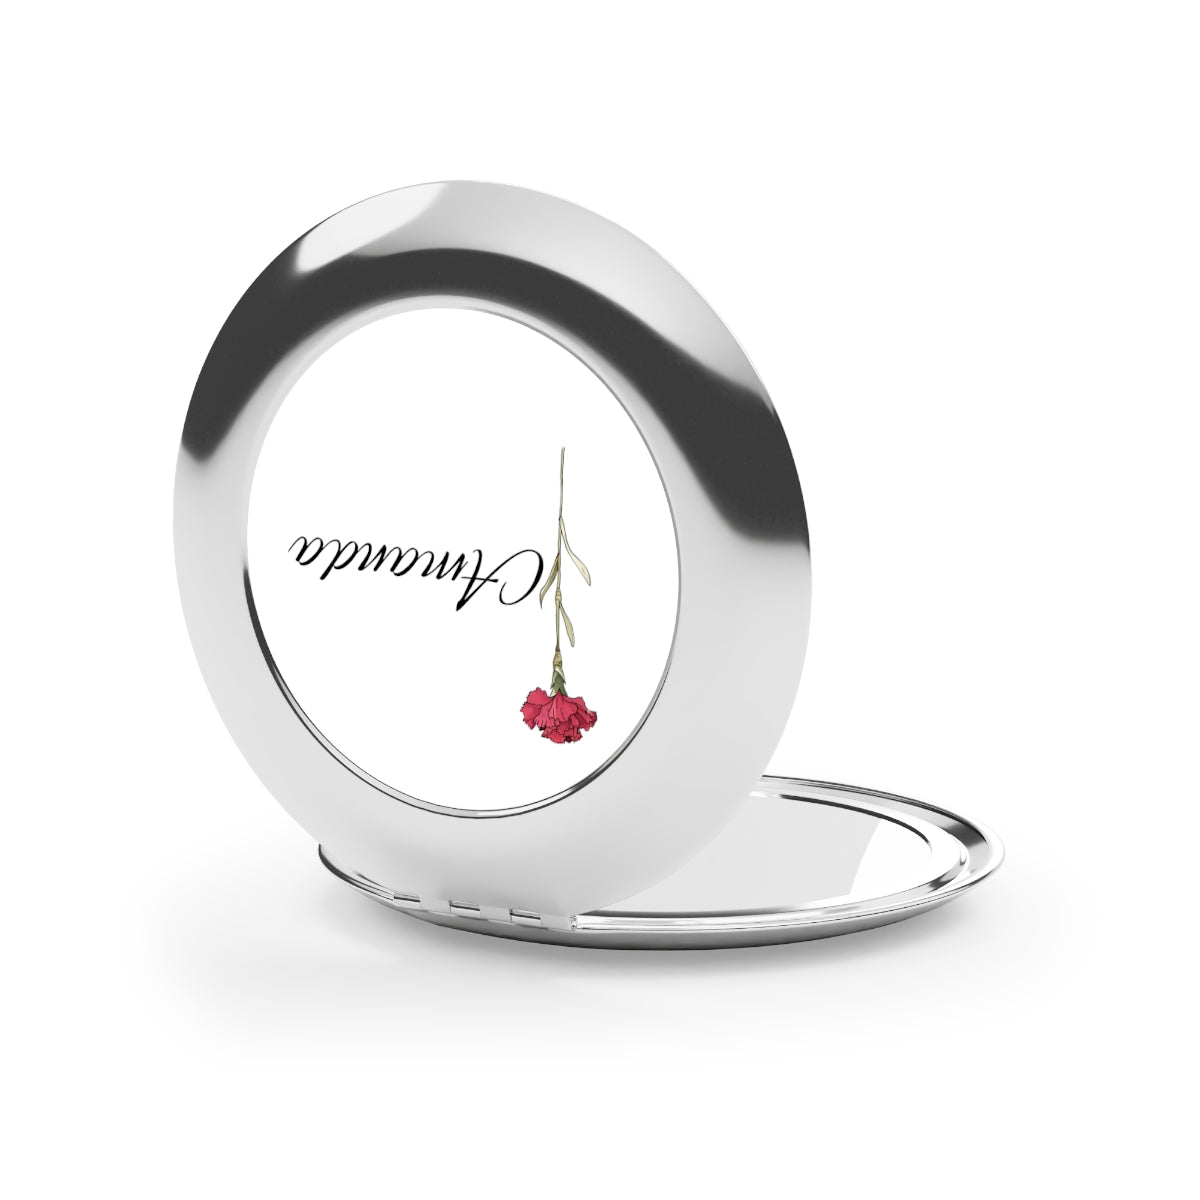 Get trendy with Personalized Bridesmaid birth flower/name Compact Travel Mirror -  available at Good Gift Company. Grab yours for $19.25 today!